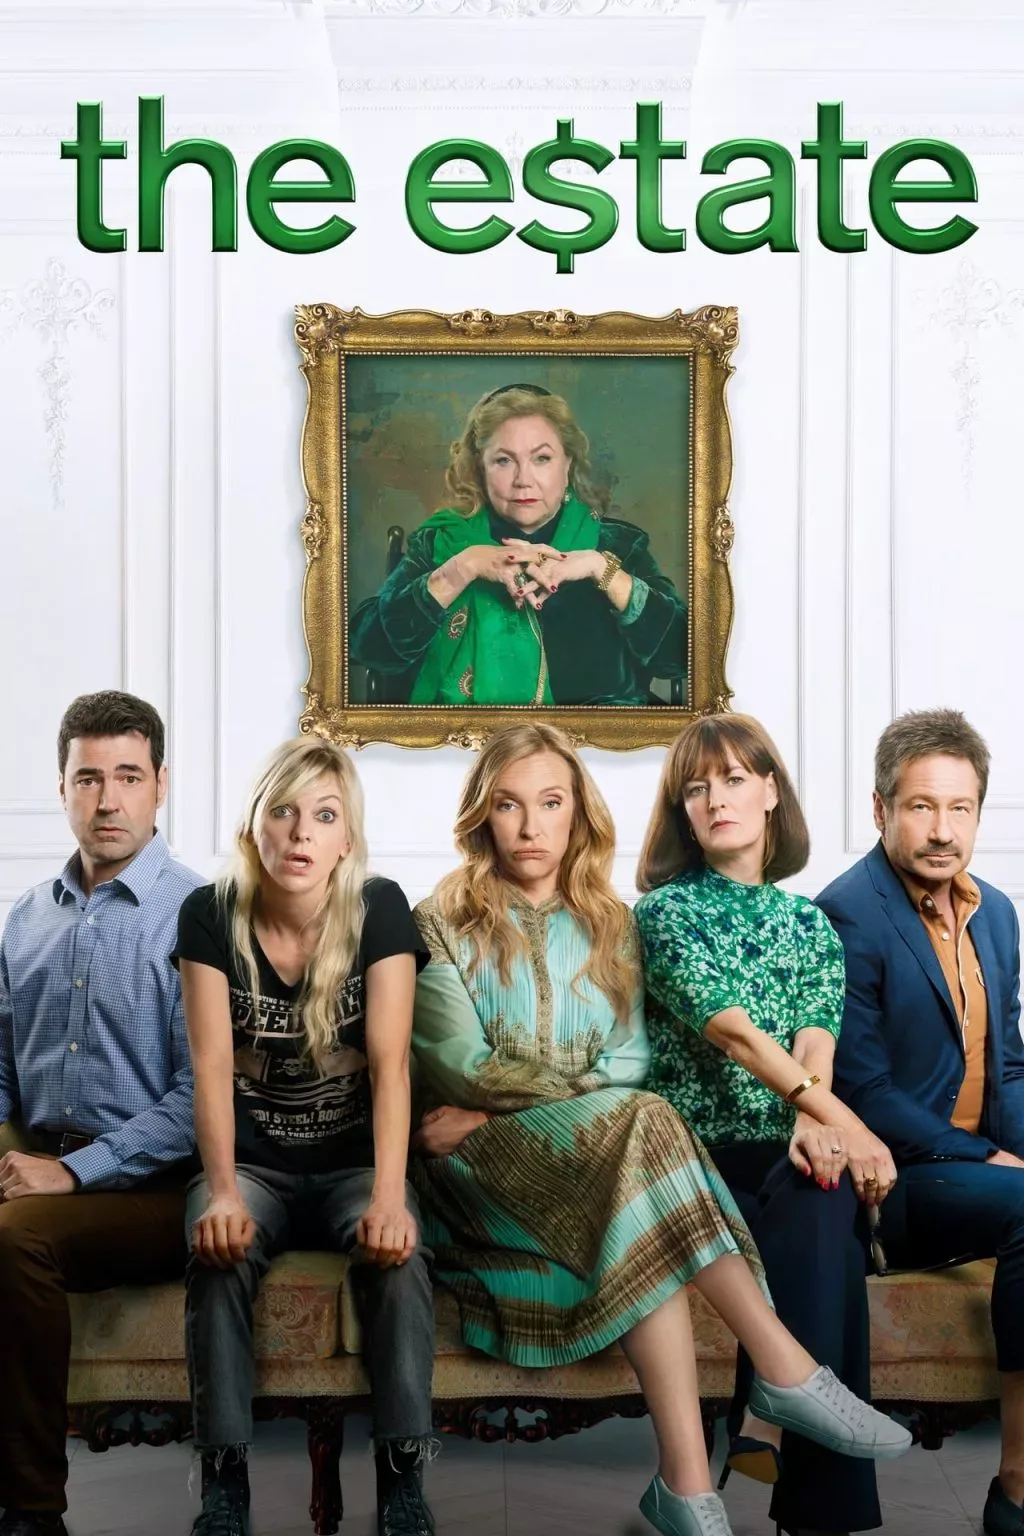 In the movie, The Estate - Two sisters attempt to win over their terminally ill, difficult-to-please Aunt in hopes of becoming the beneficiaries of her wealthy estate, only to find the rest of their greedy family members have the same idea.